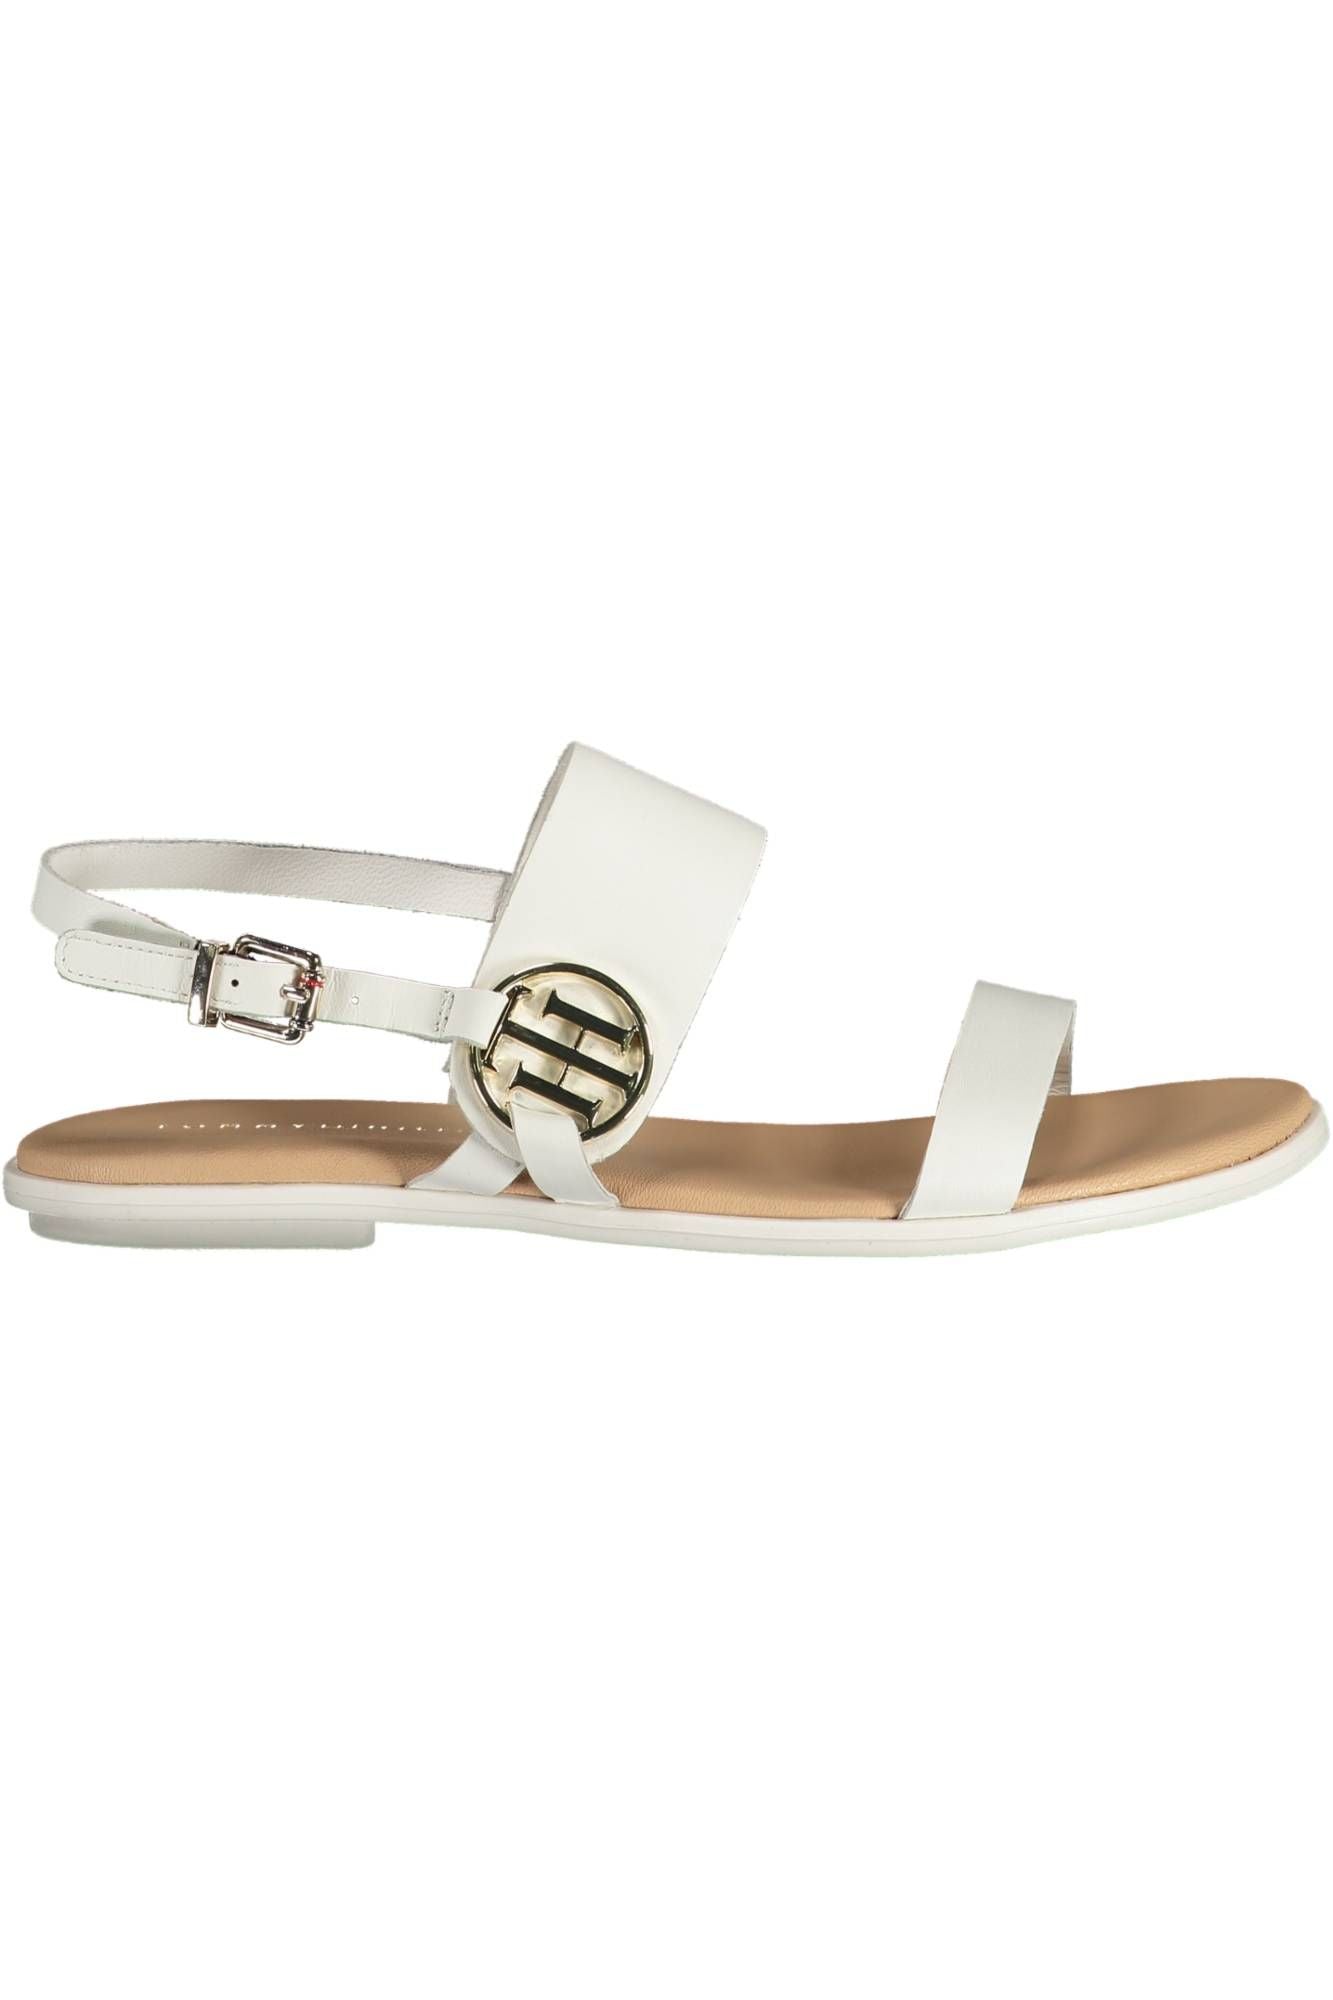 Chic Ankle Strap White Leather Sandals